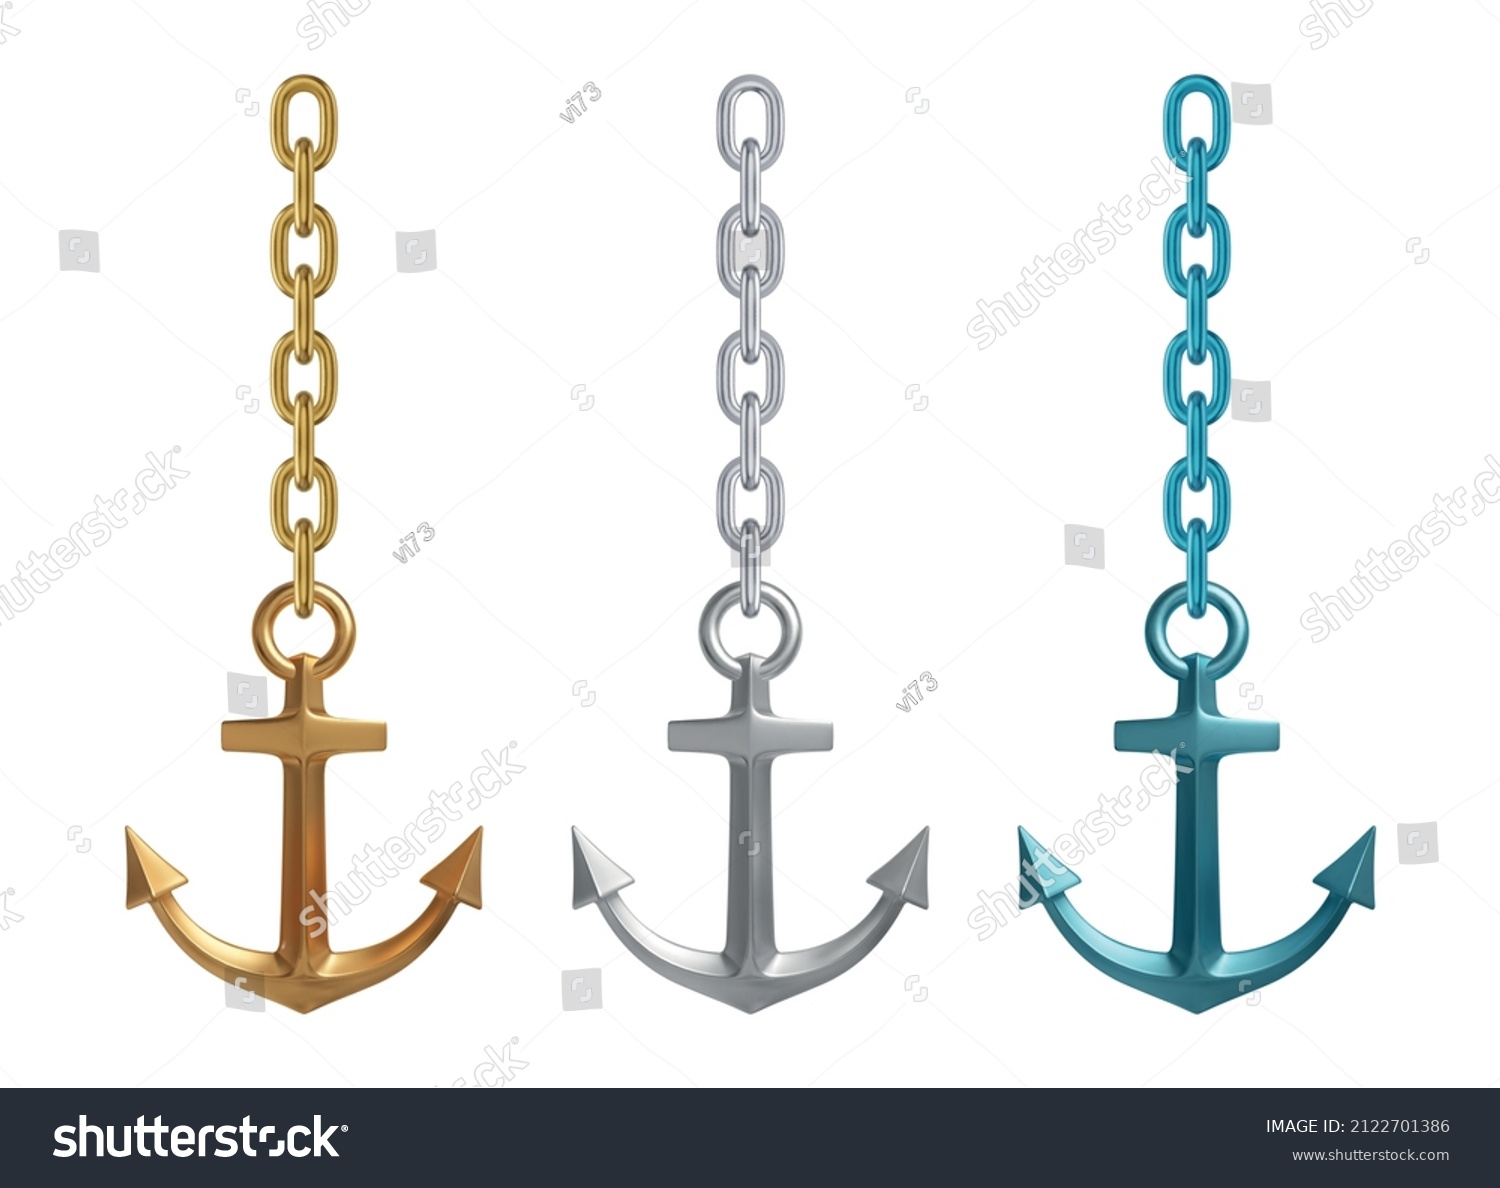 SVG of Realistic metallic, golden and blue anchors with chains. Vector illustration svg